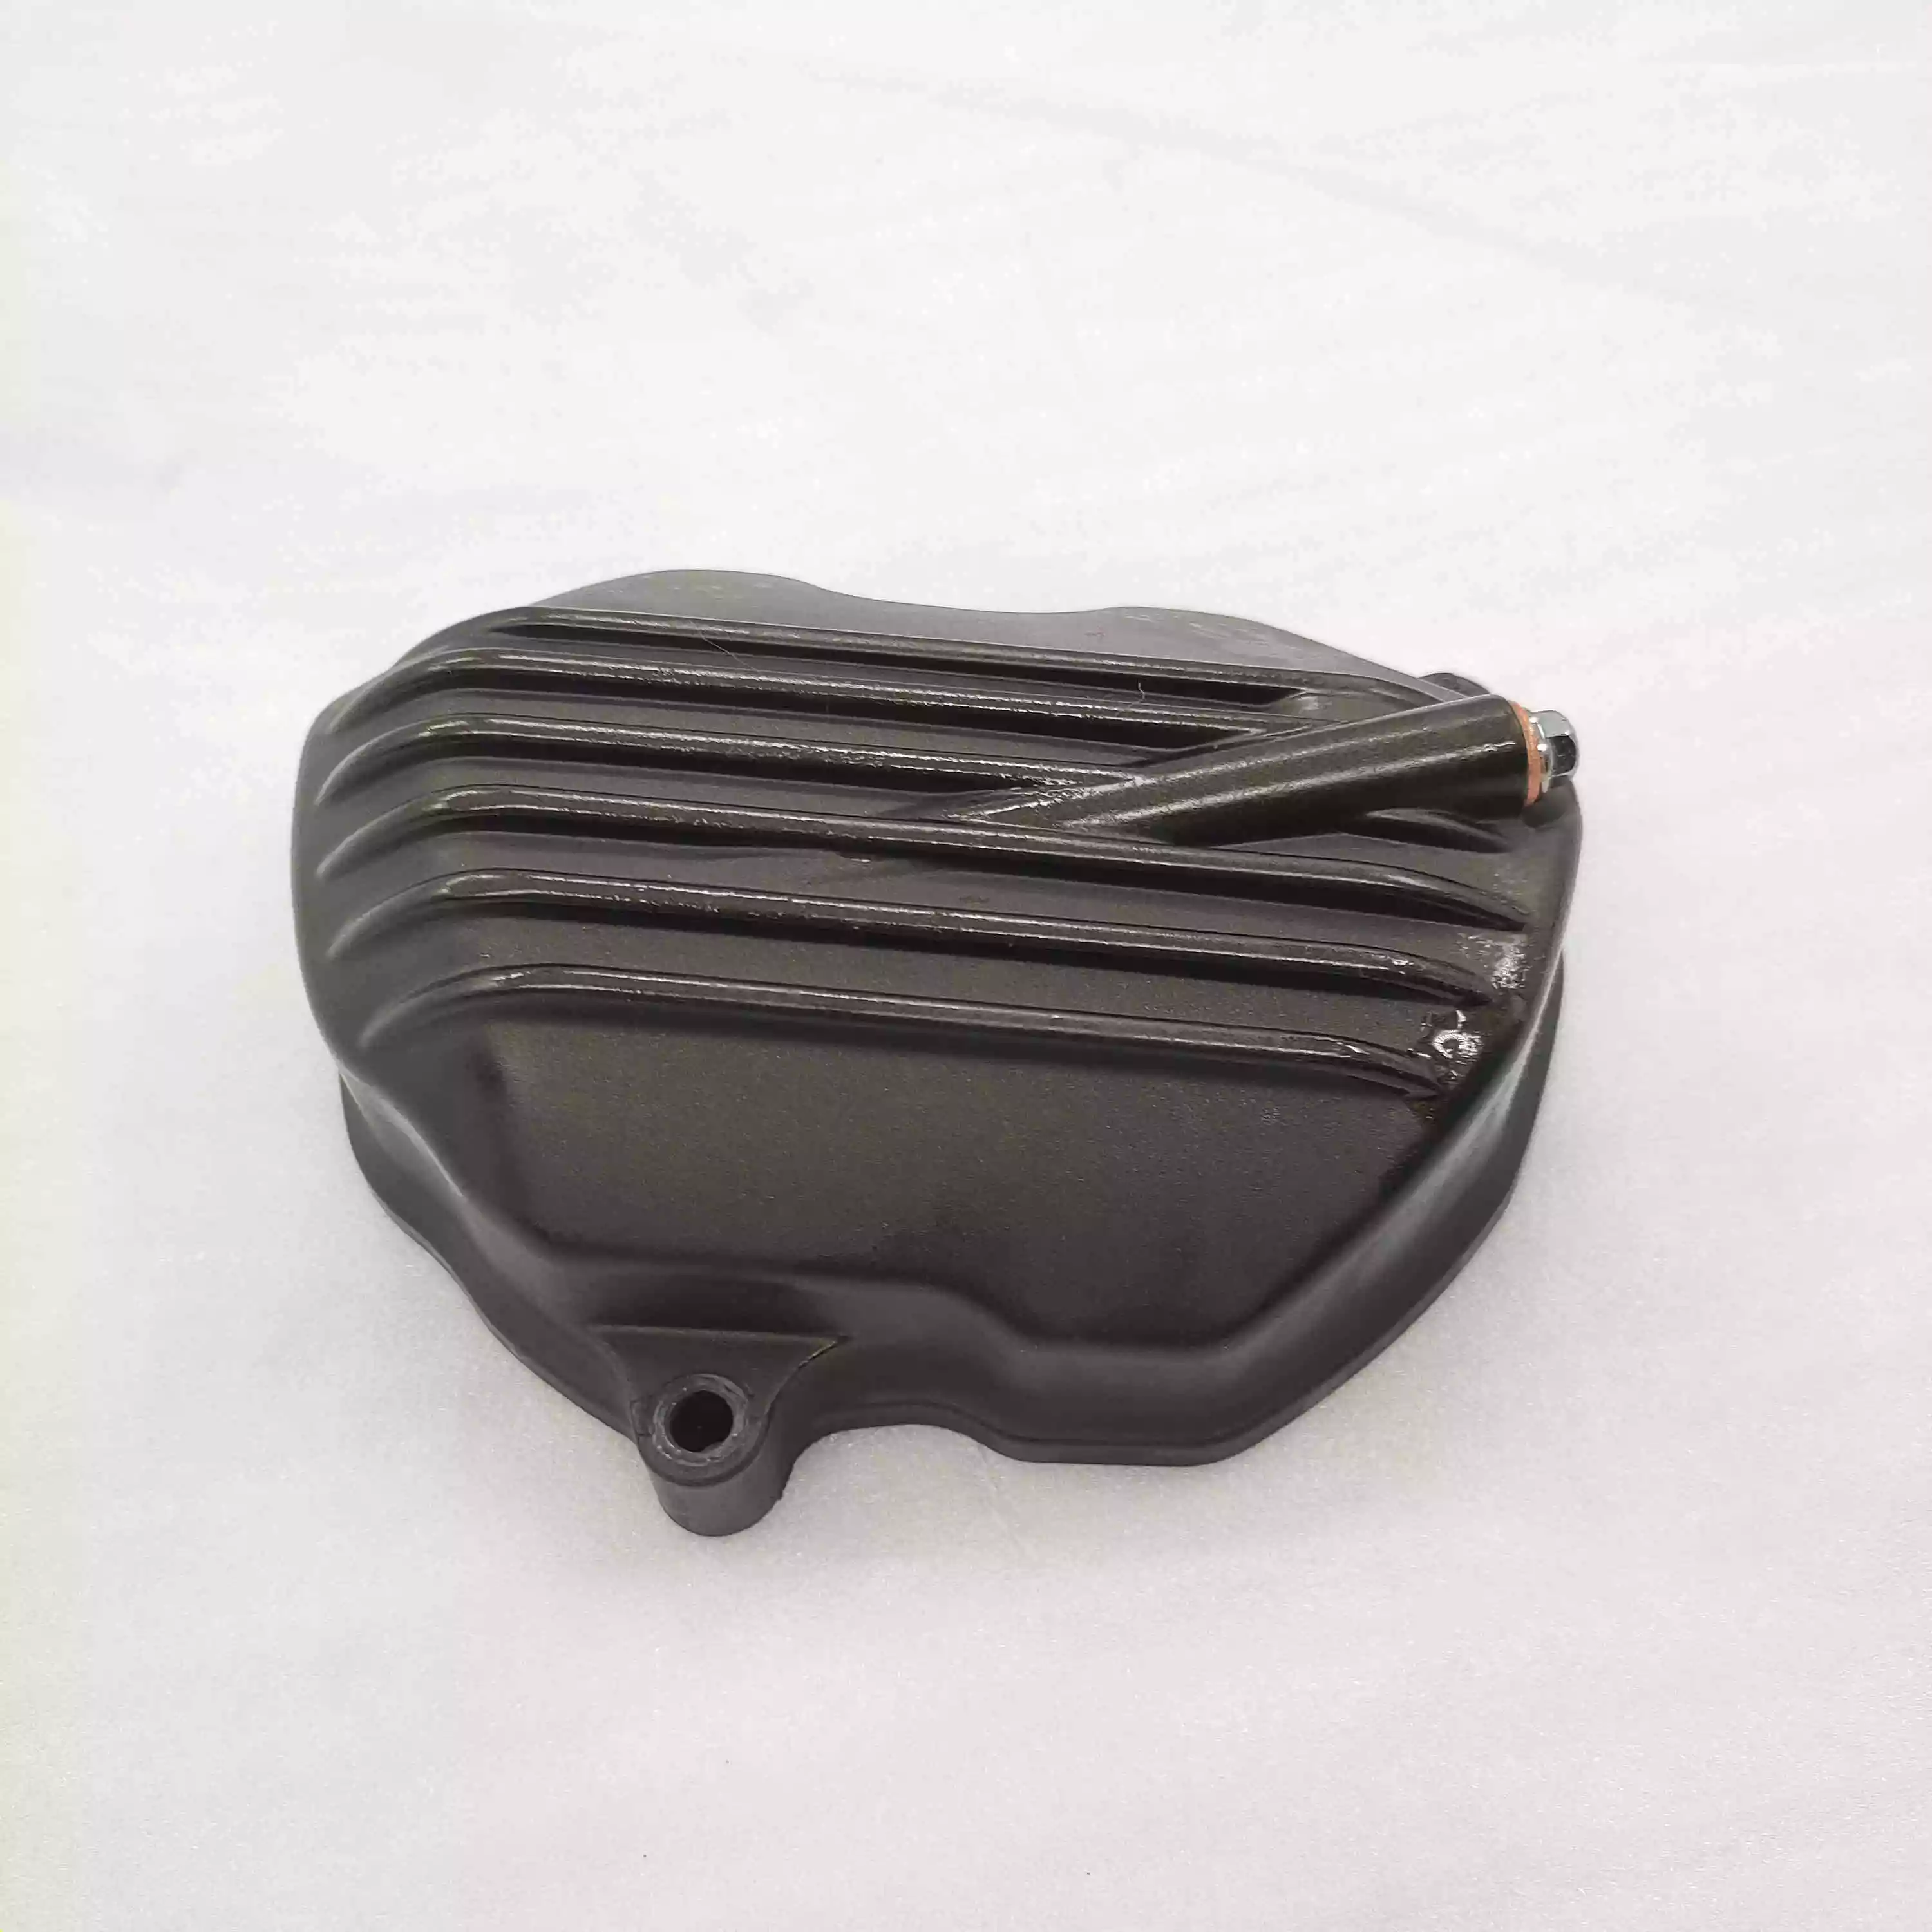 2022 China high quality motorcycle spare parts tricycle LIFAN 150 air-cooled engine crlinder head cover custom type